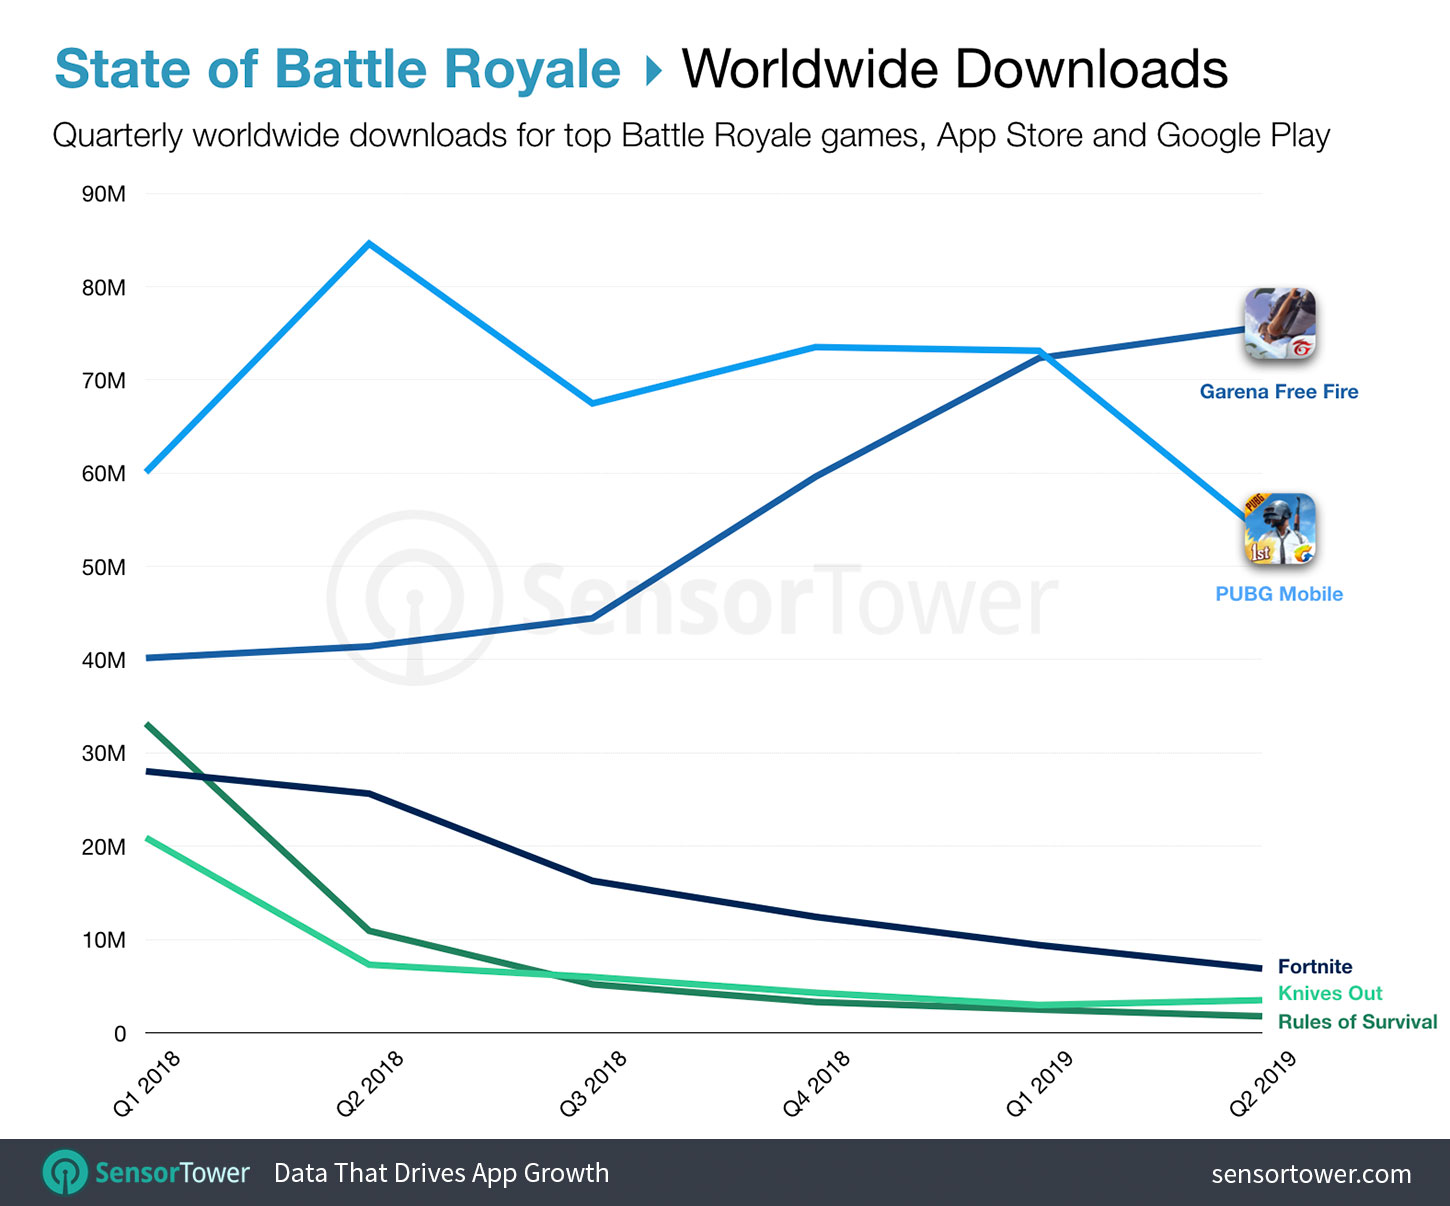 Top Battle Royale Games by Downloads from Q1 2018 to Q2 2019